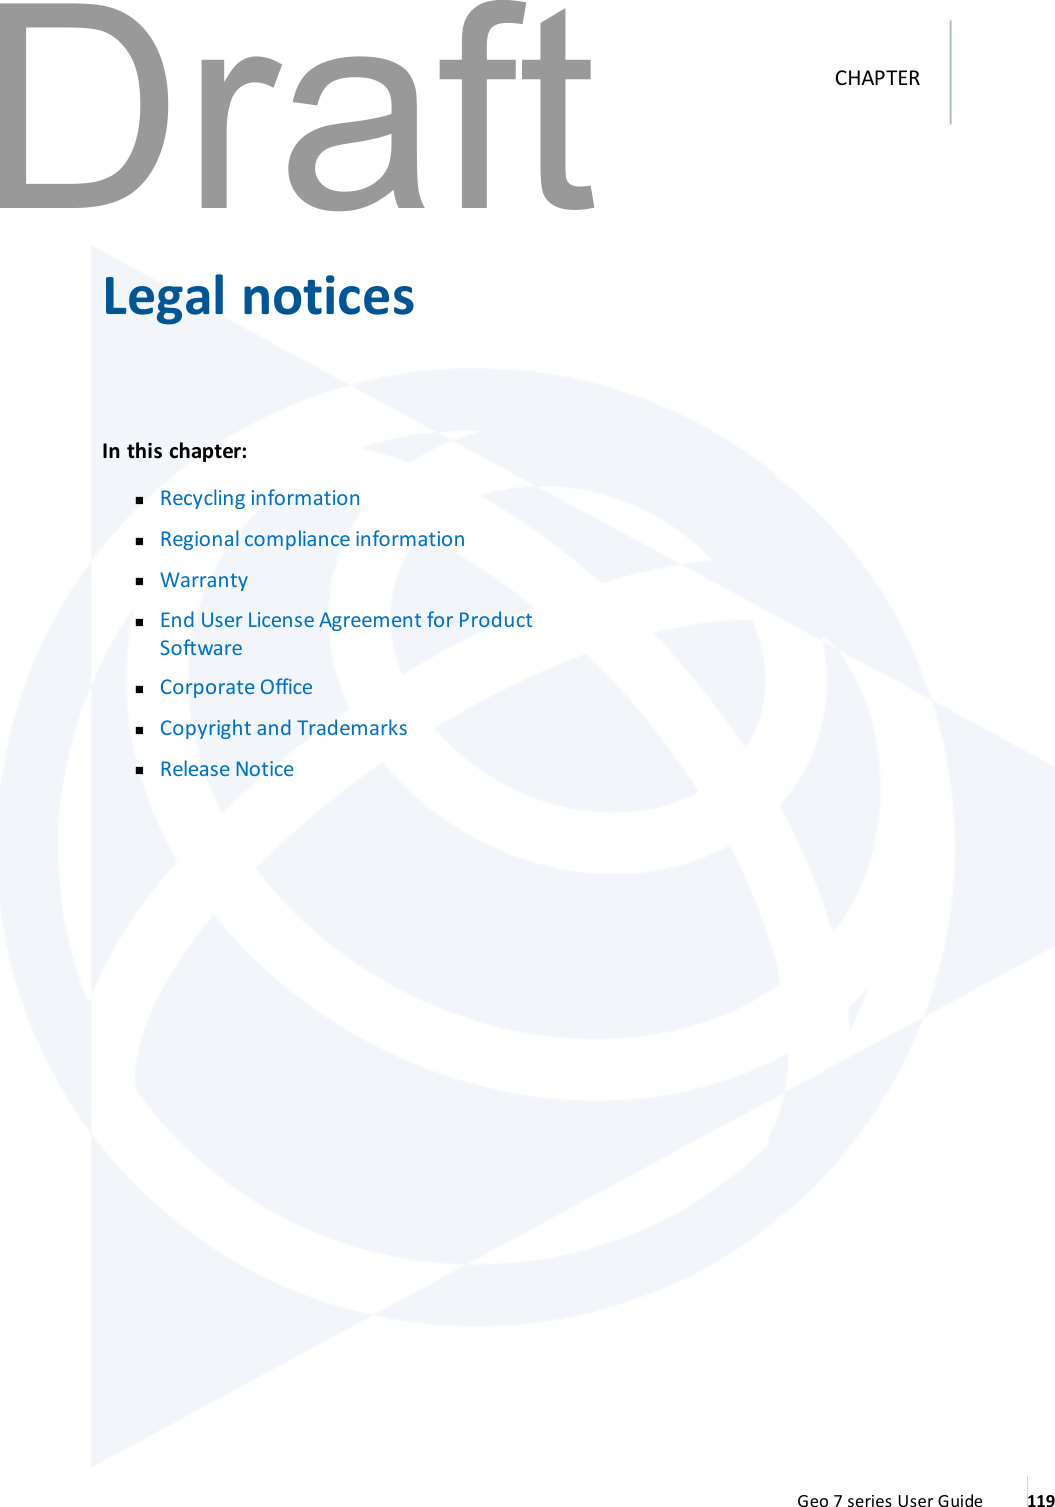 Legal noticesIn this chapter:nRecycling informationnRegional compliance informationnWarrantynEnd User License Agreement for ProductSoftwarenCorporate OfficenCopyright and TrademarksnRelease NoticeGeo 7 series User Guide 119CHAPTERDraft